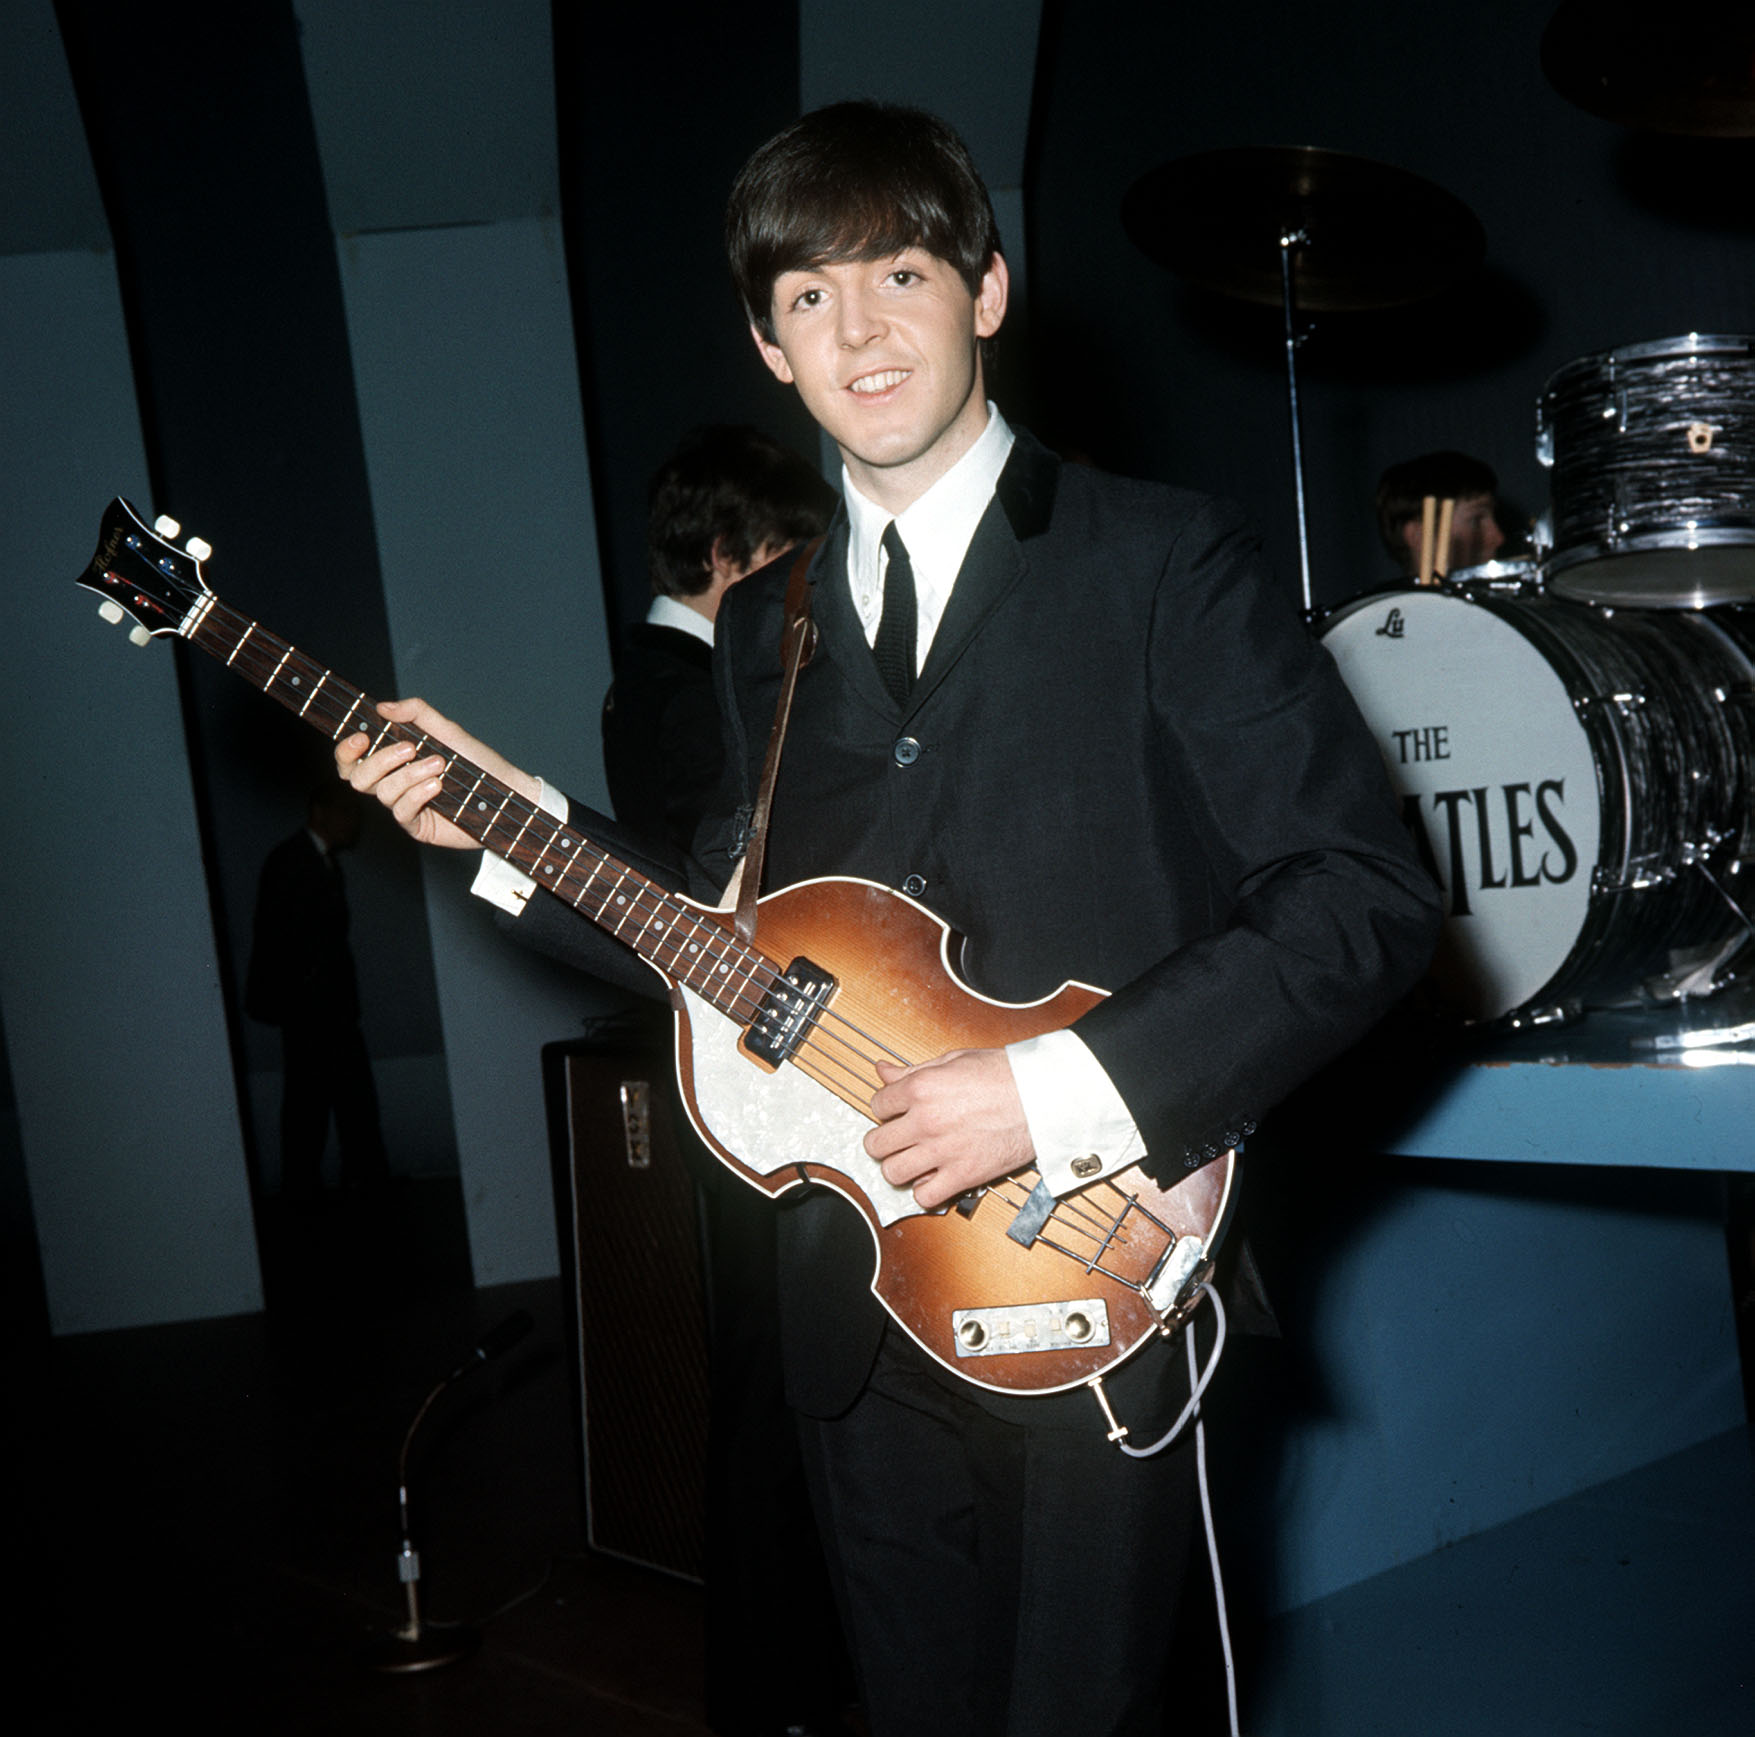 The Beatles' Paul McCartney with a drum